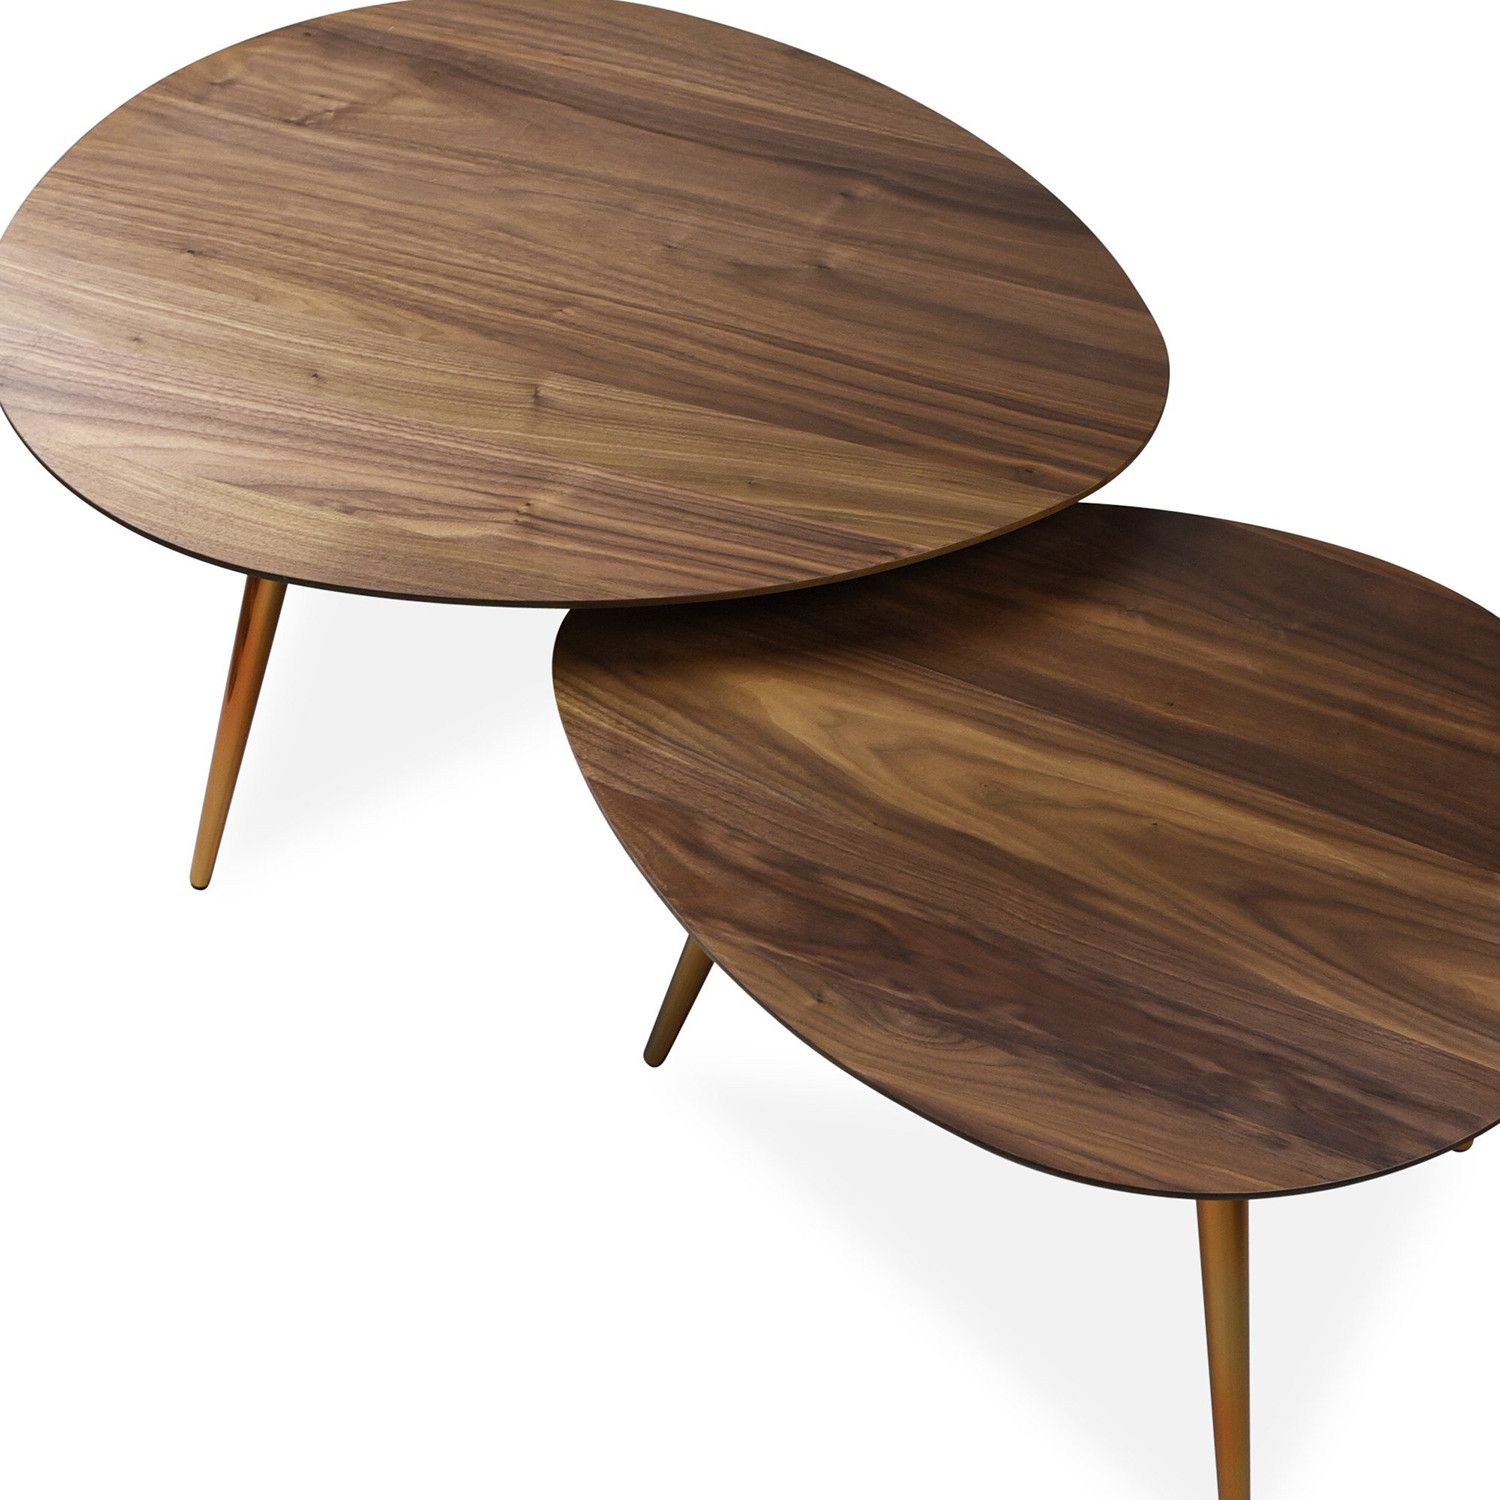 Maddox Mid Century Modern Nesting Coffee Table Set – Edloe Finch Pertaining To Wooden Mid Century Coffee Tables (Gallery 12 of 20)